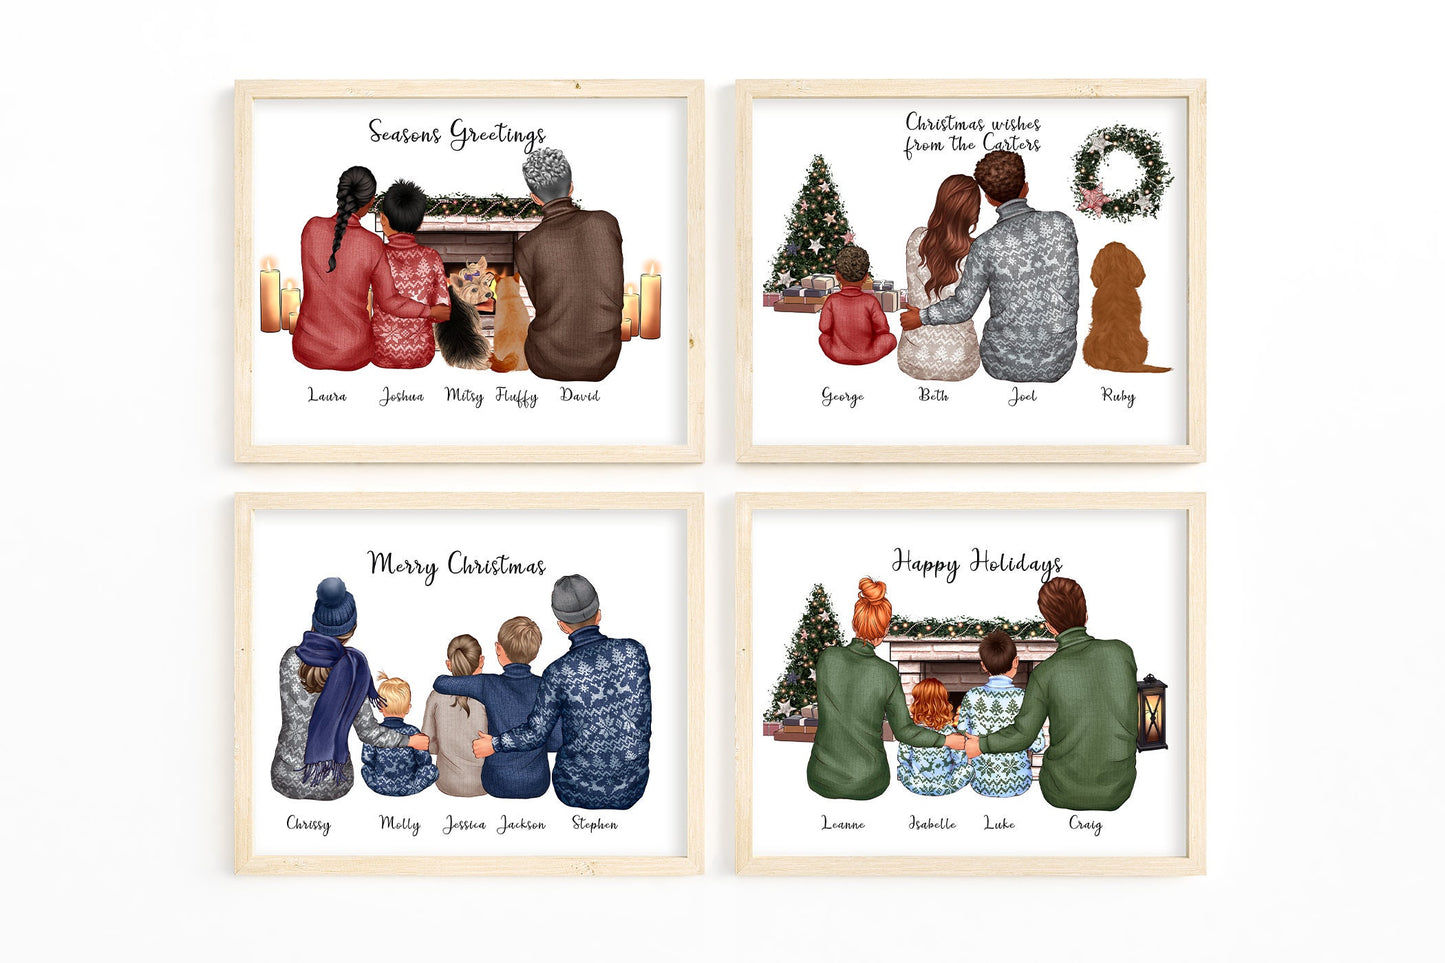 Christmas family print personalised with festive sweaters and winter holiday decor – treasured pets included too in A4, A5 or Greeting card